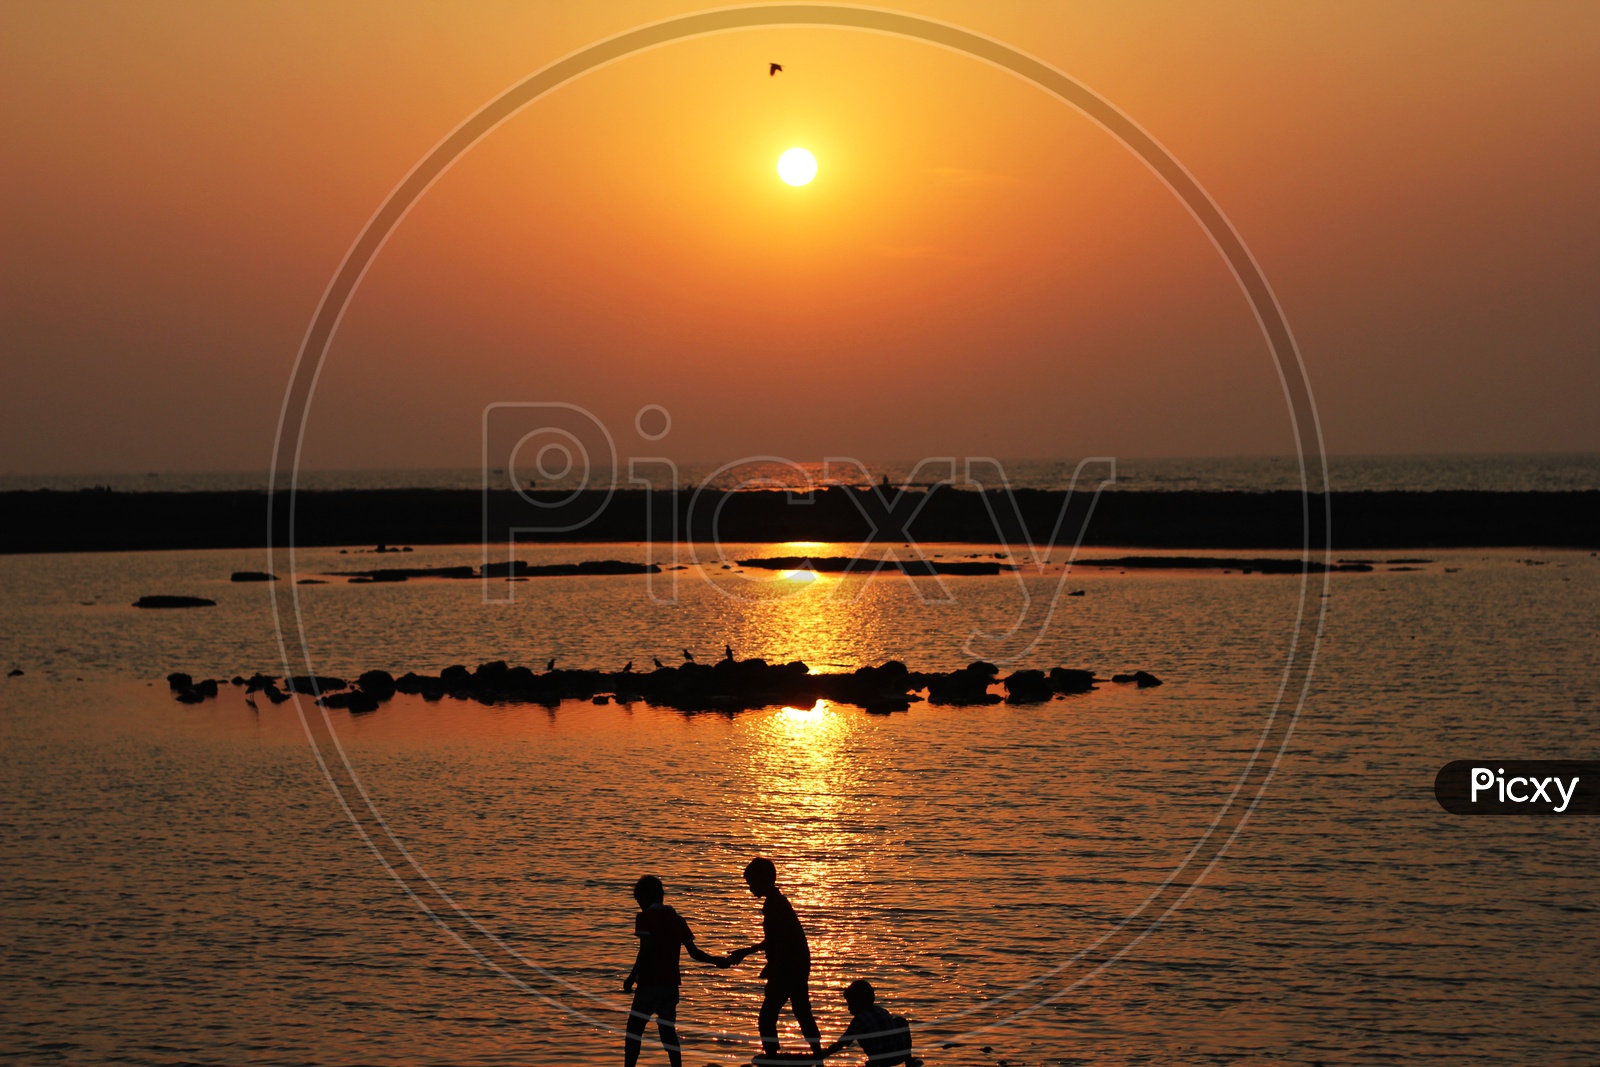 Kids playing along the beach during sunset